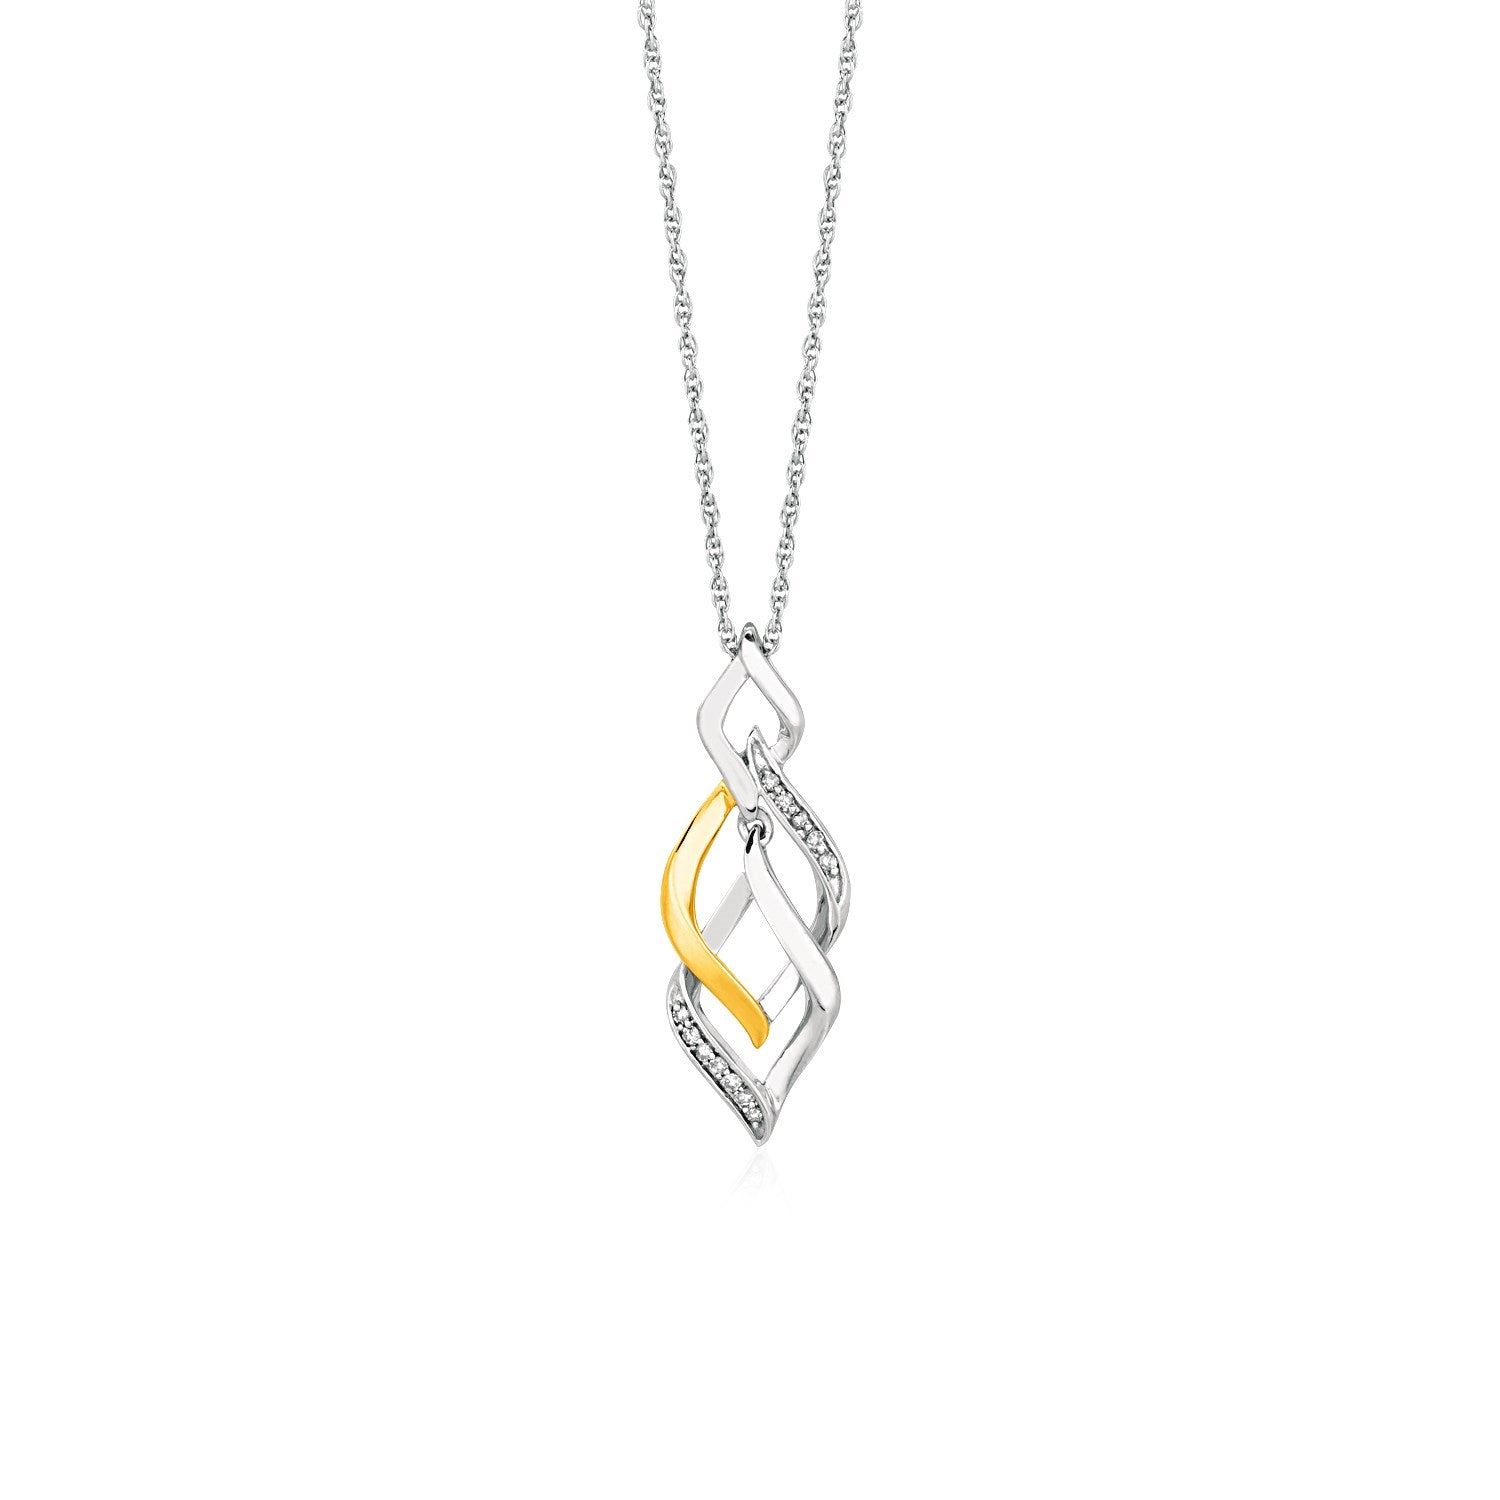 Two Toned Interlocking Twist Pendant with Diamonds in Sterling Silver